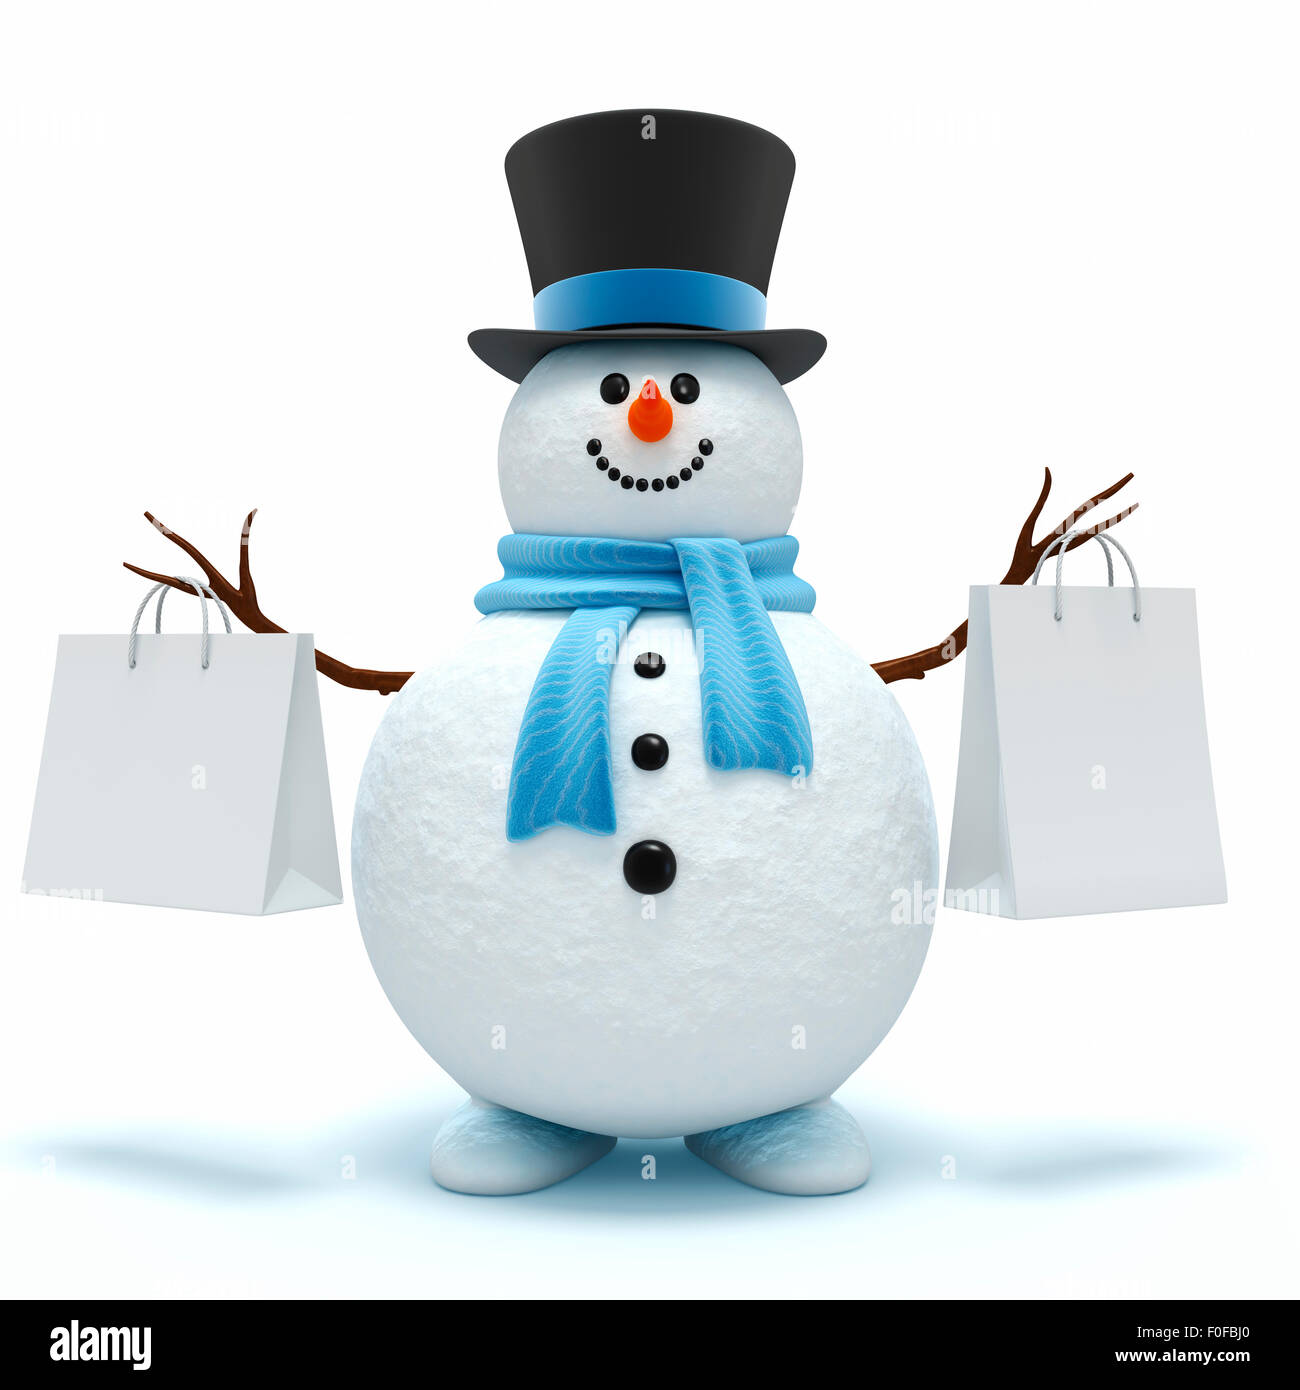 Cute snowman with shopping bags Banque D'Images